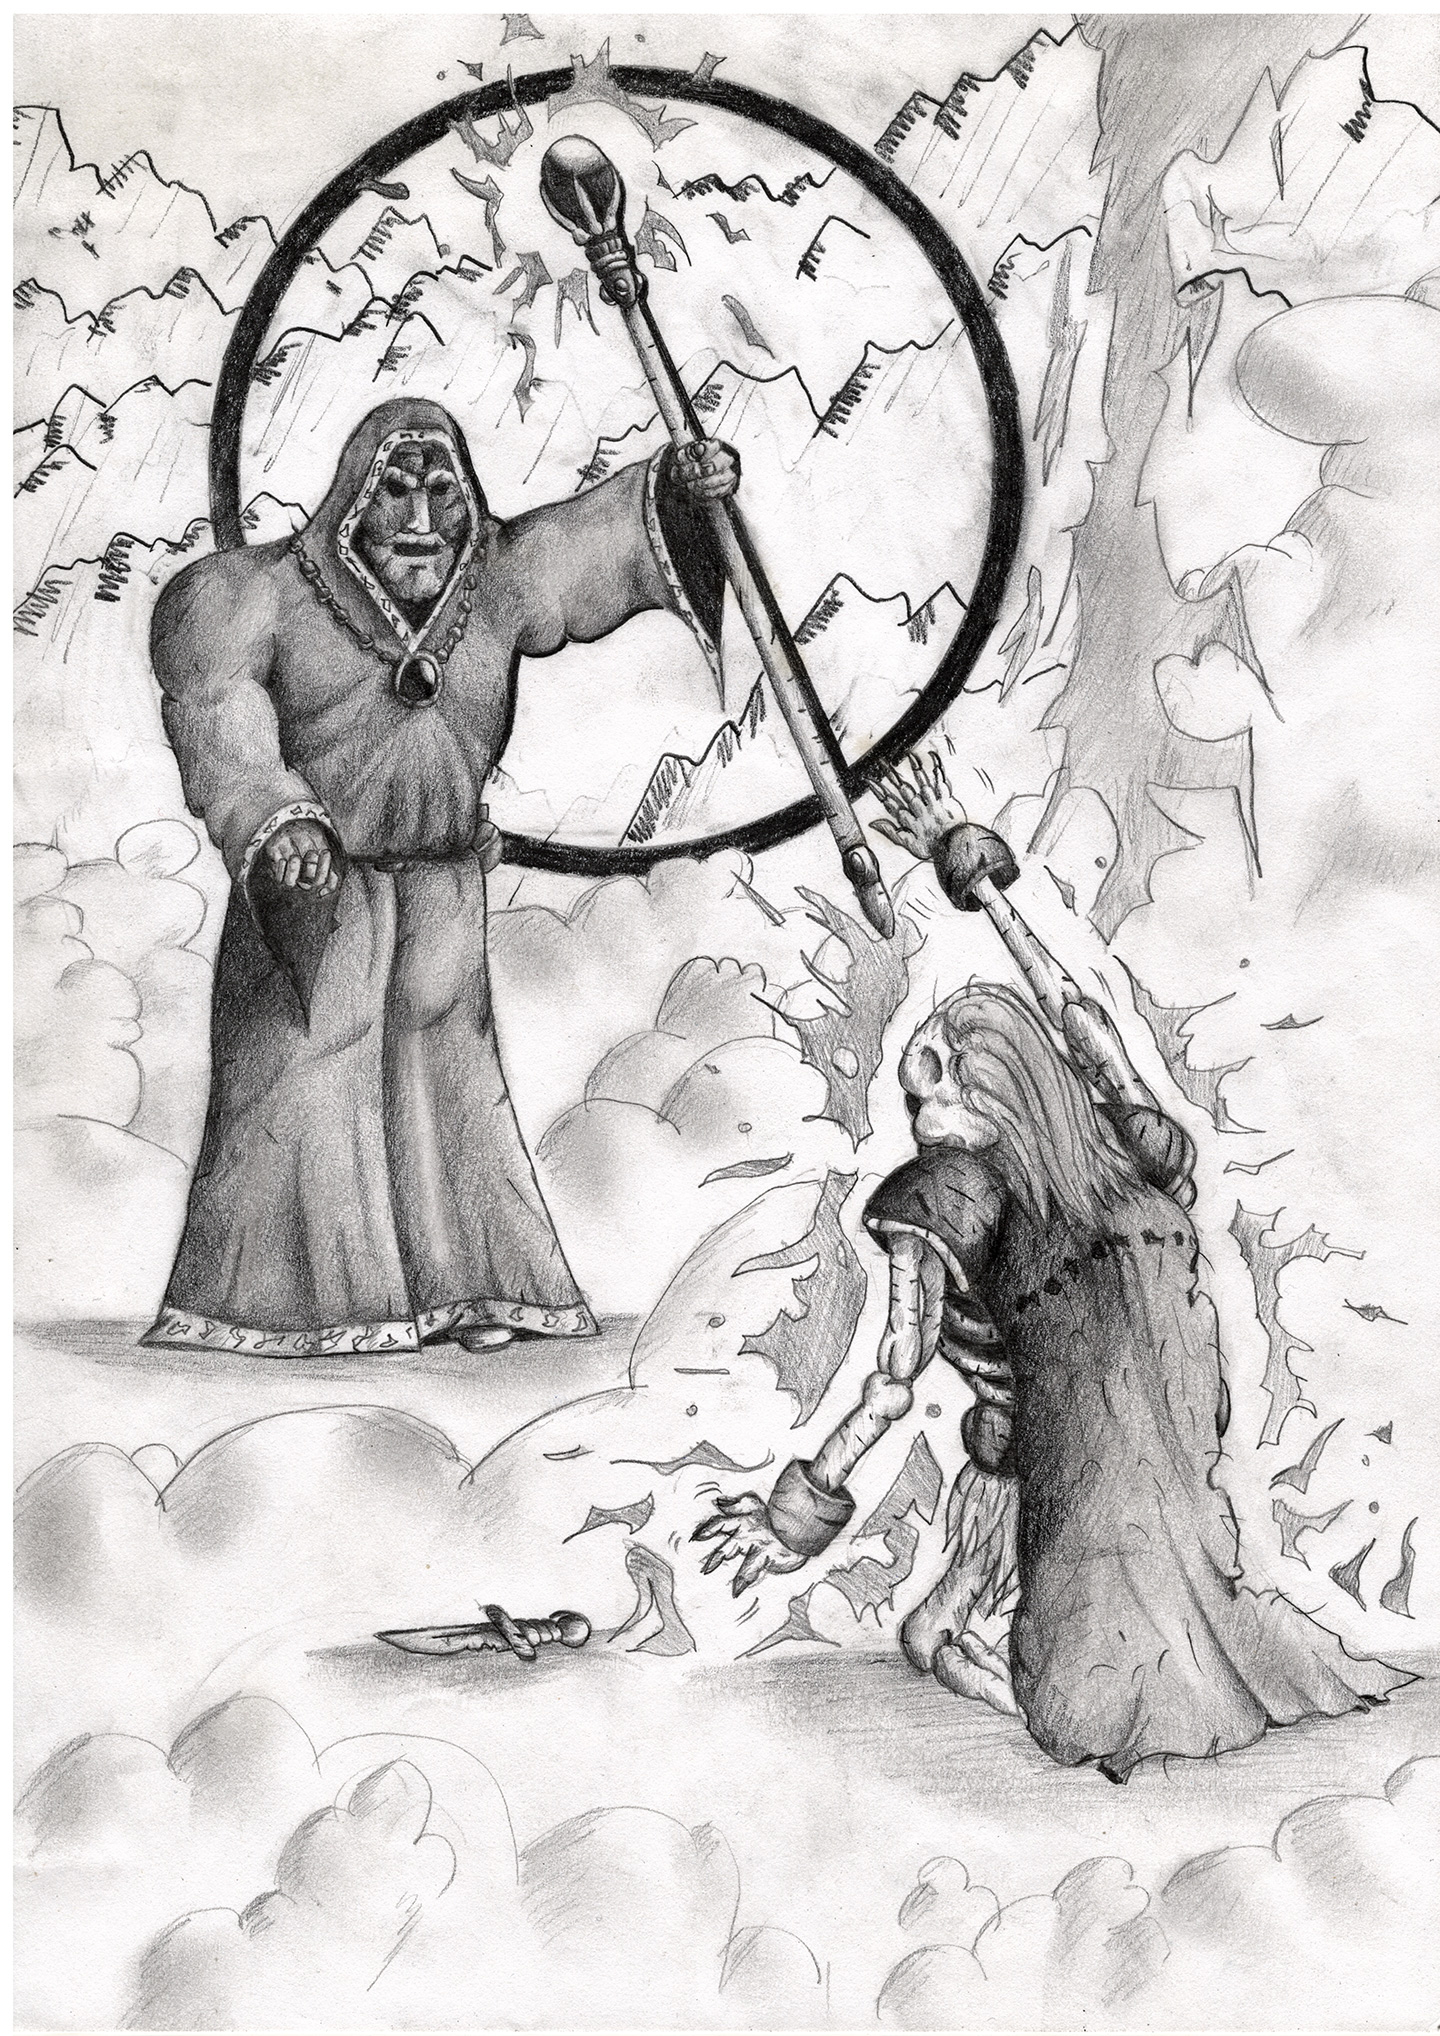 A drawing about a magician casting a spell on a skeleton warrior to dominate it